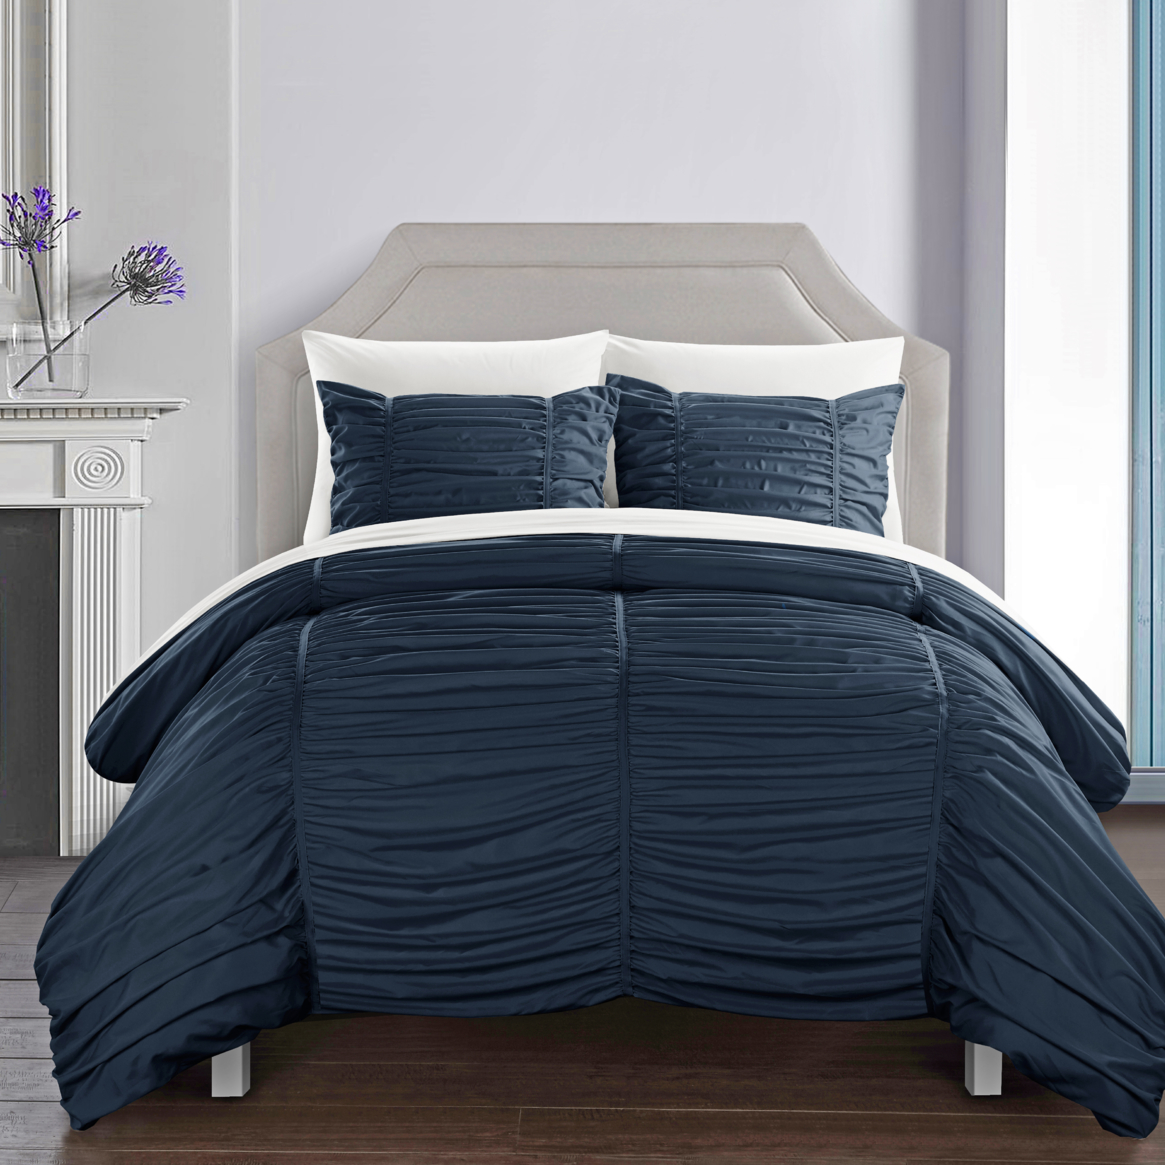 Kleia 7 Or 5 Piece Comforter Set Contemporary Striped Ruched Ruffled Design Bed In A Bag - Navy, King